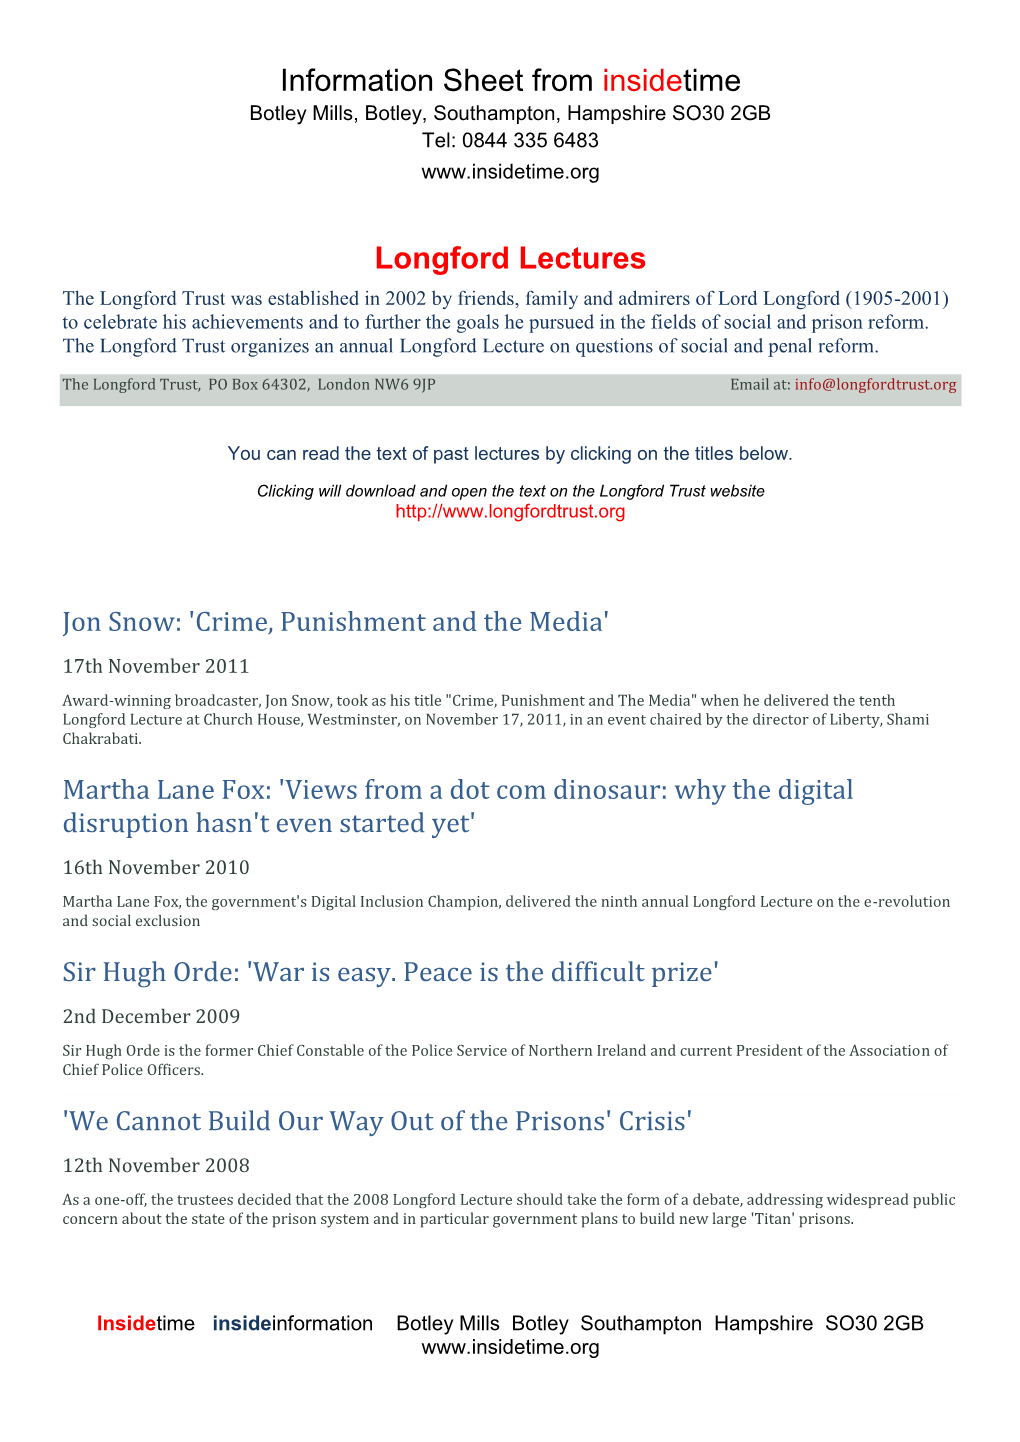 Information Sheet from Insidetime Longford Lectures